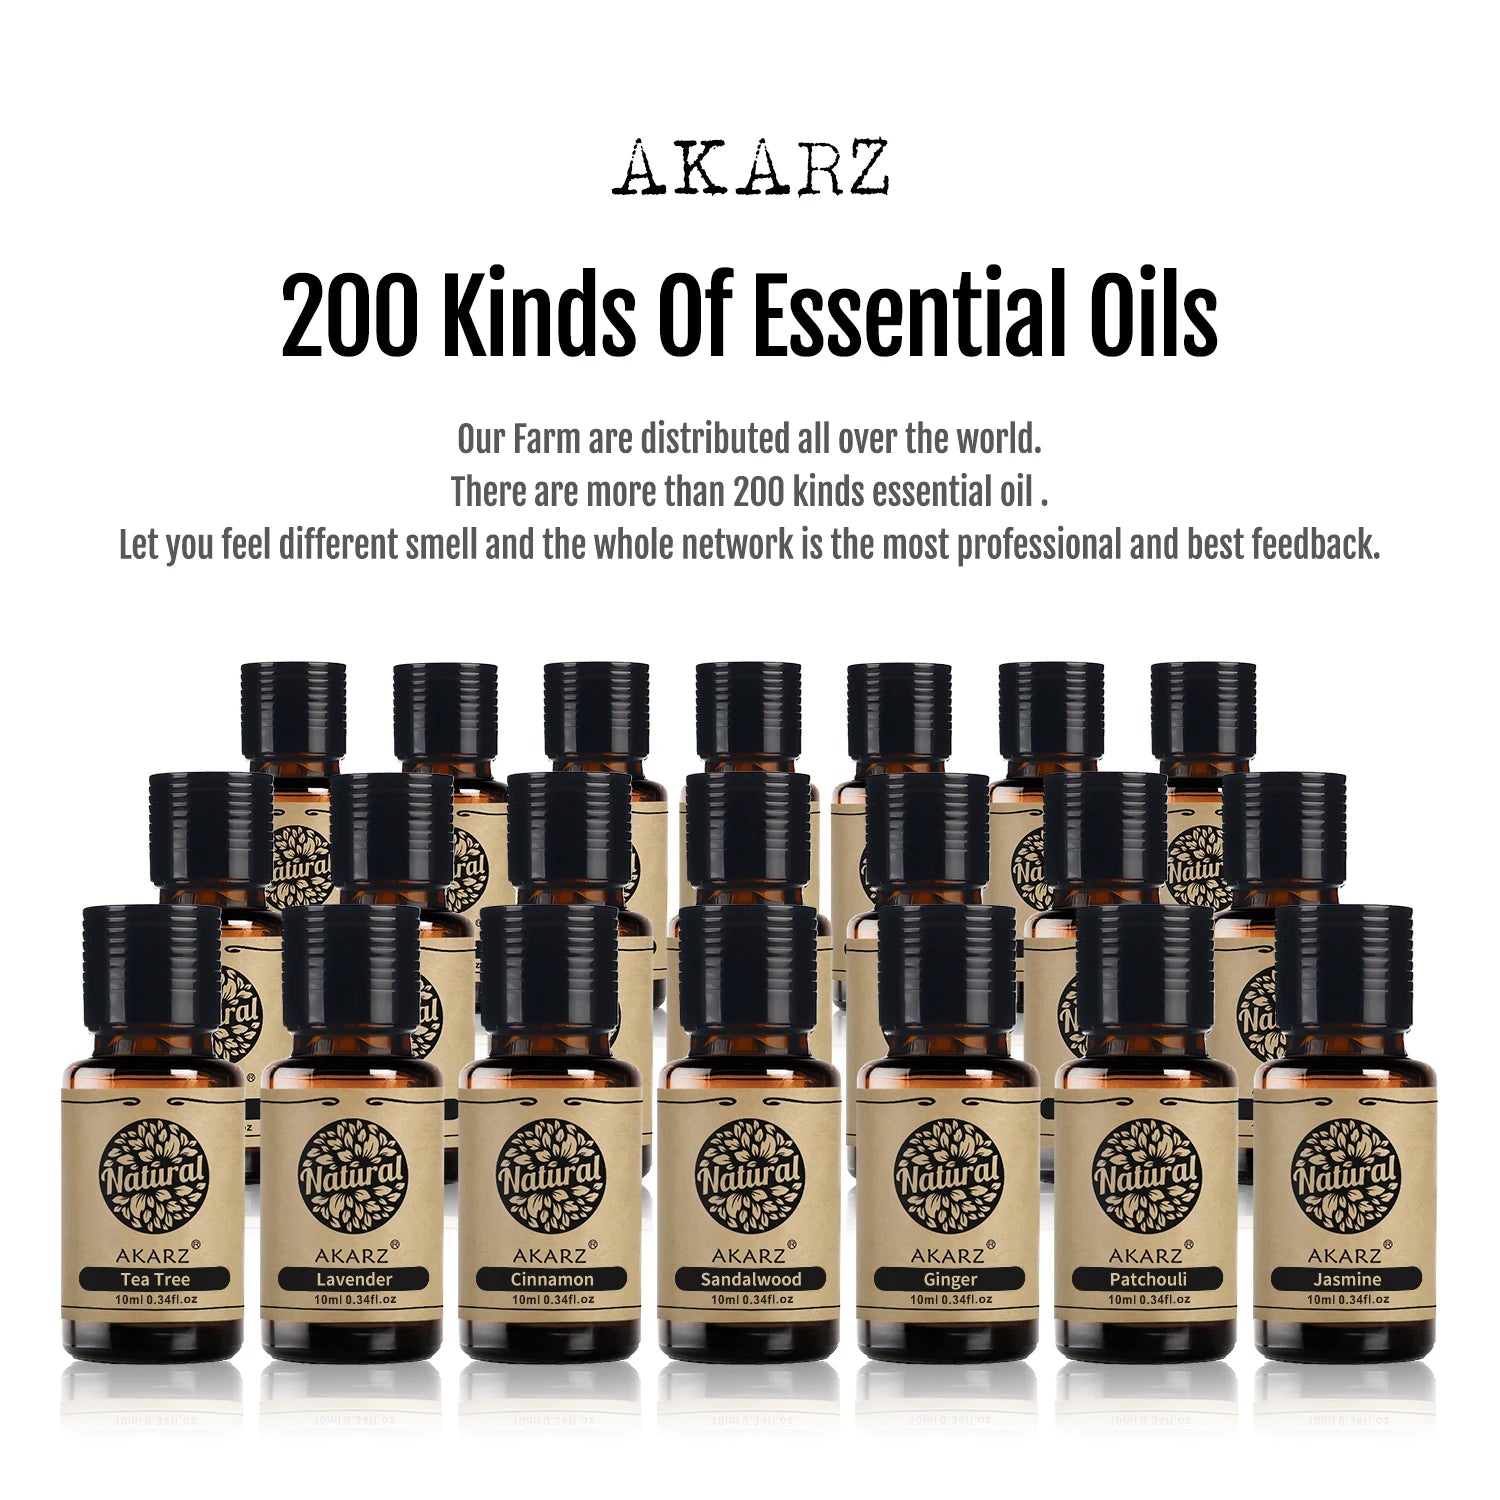 AKARZ™ Cinnamon Essential Oil: Natural Aromatherapy for Skin Tightening and Digestive Tract Soothing